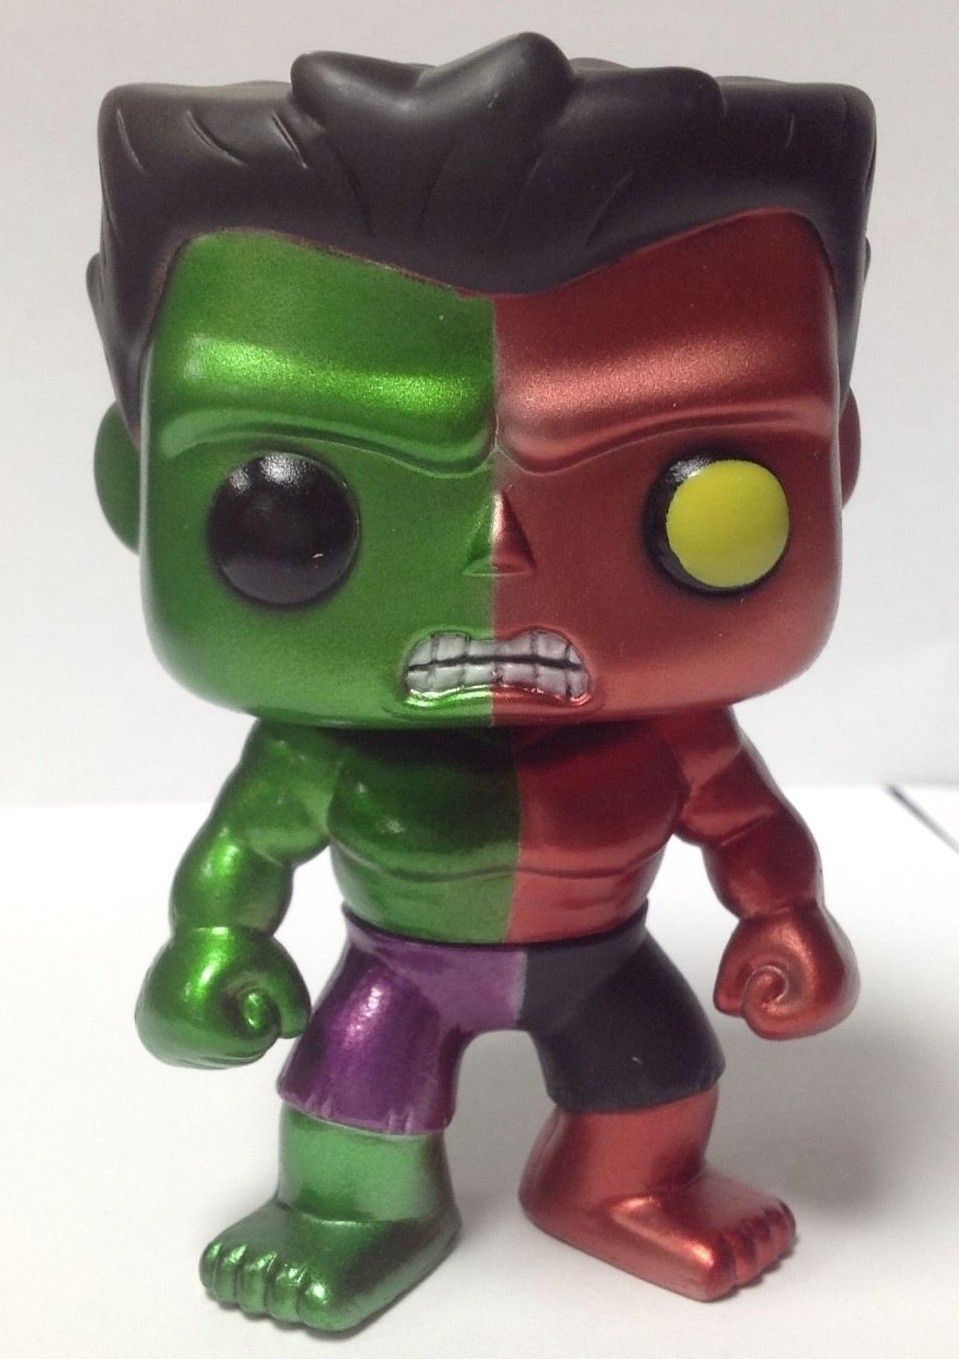 Details about   Funko Pop Marvel Compound Hulk 39 Metalic Toy Anxiety Exclusive （+Protector） 